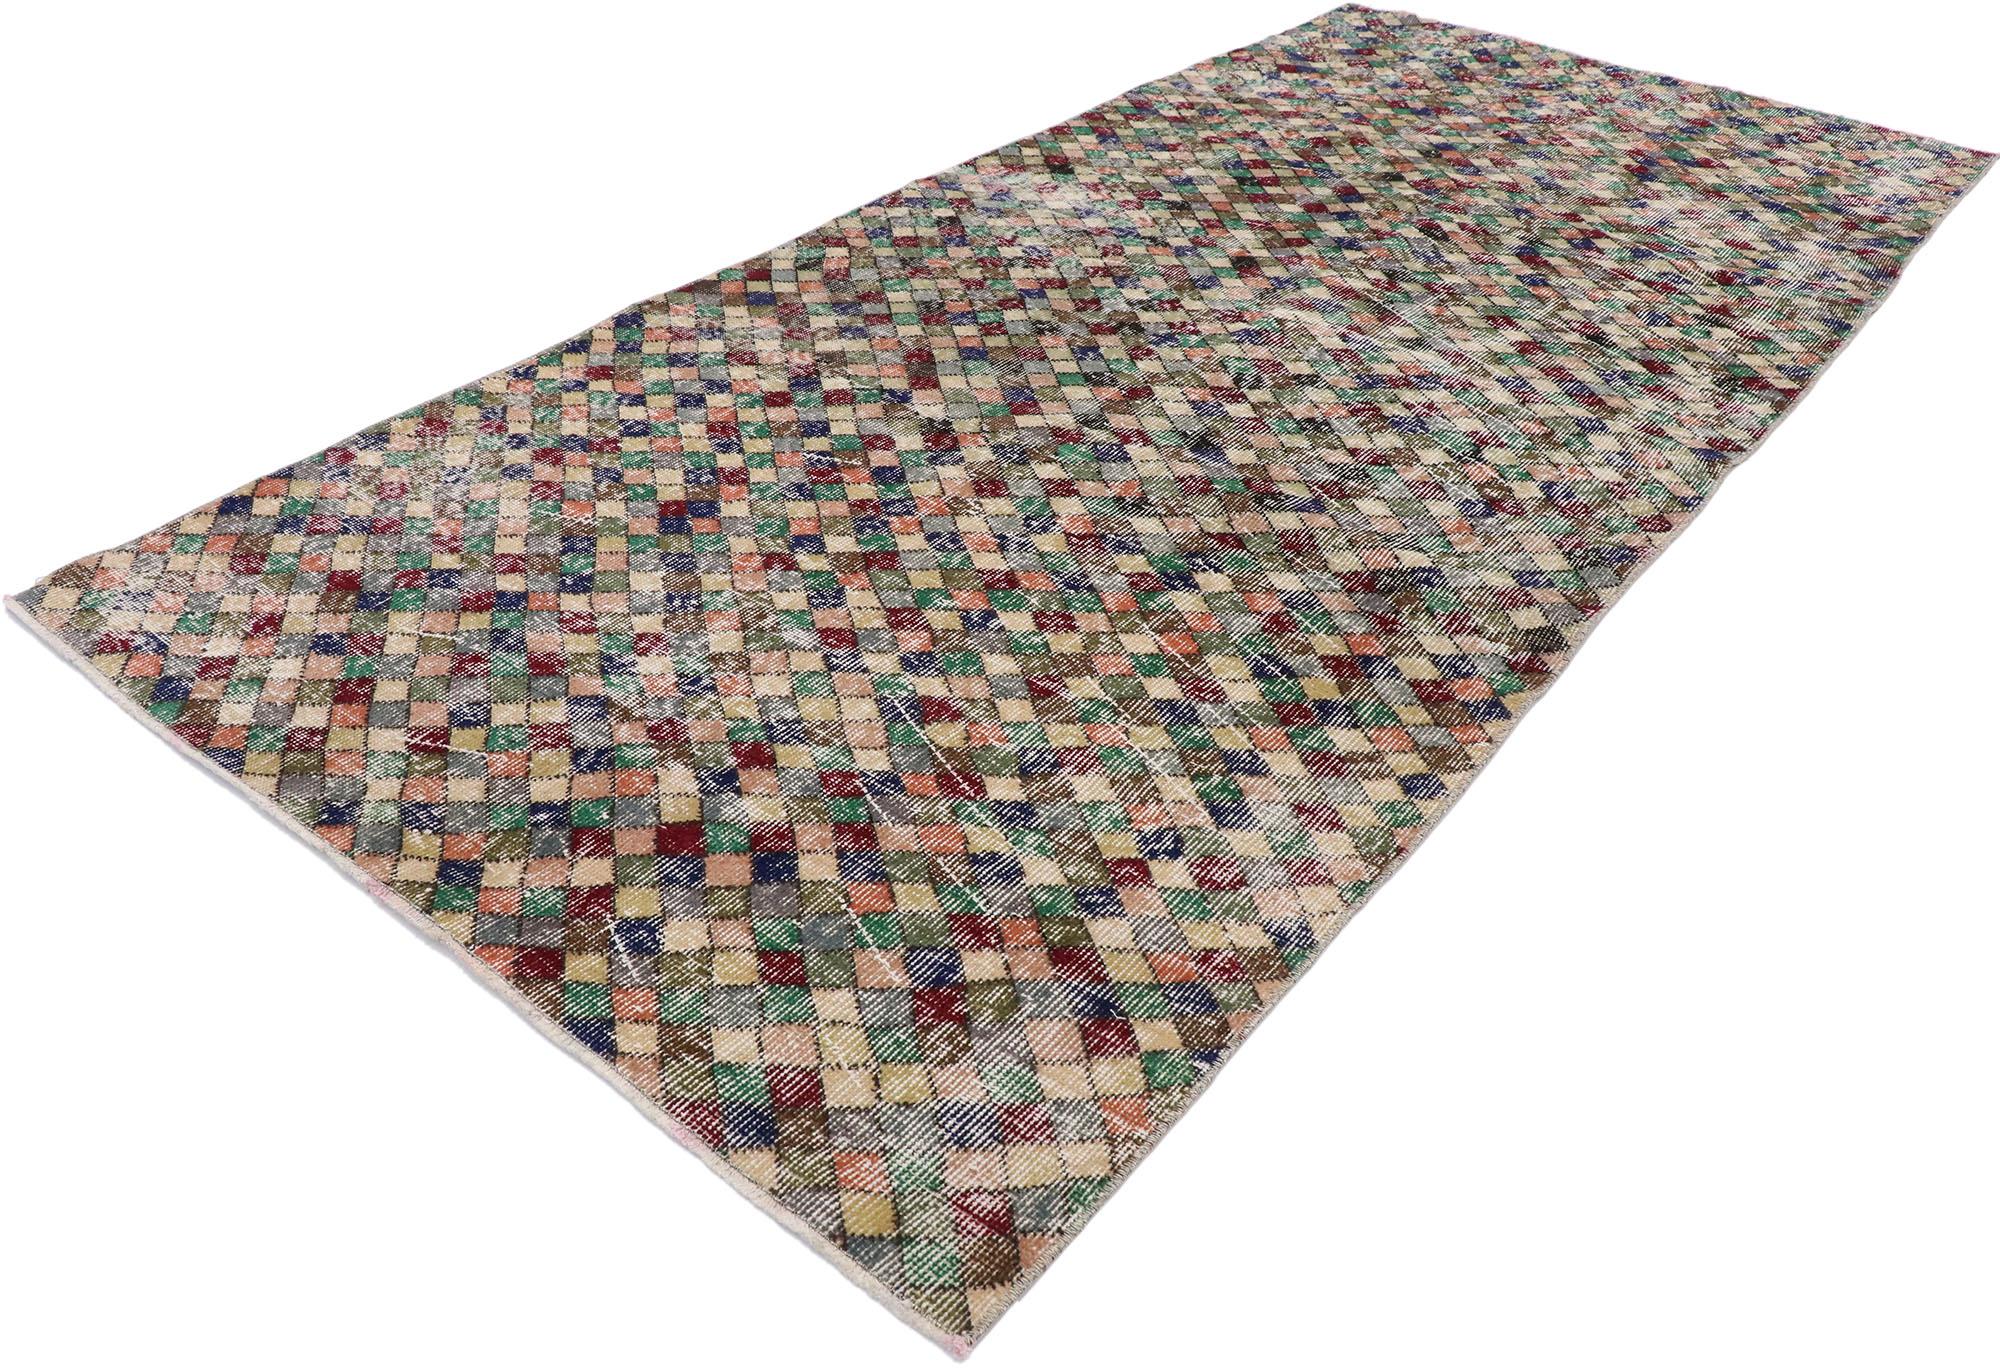 53320 Distressed vintage Turkish Sivas rug with rustic Mid-Century Modern style. This hand knotted wool distressed vintage Turkish Sivas rug features an all-over checkered pattern comprised of multicolored diamonds. Gentle waves of abrash and